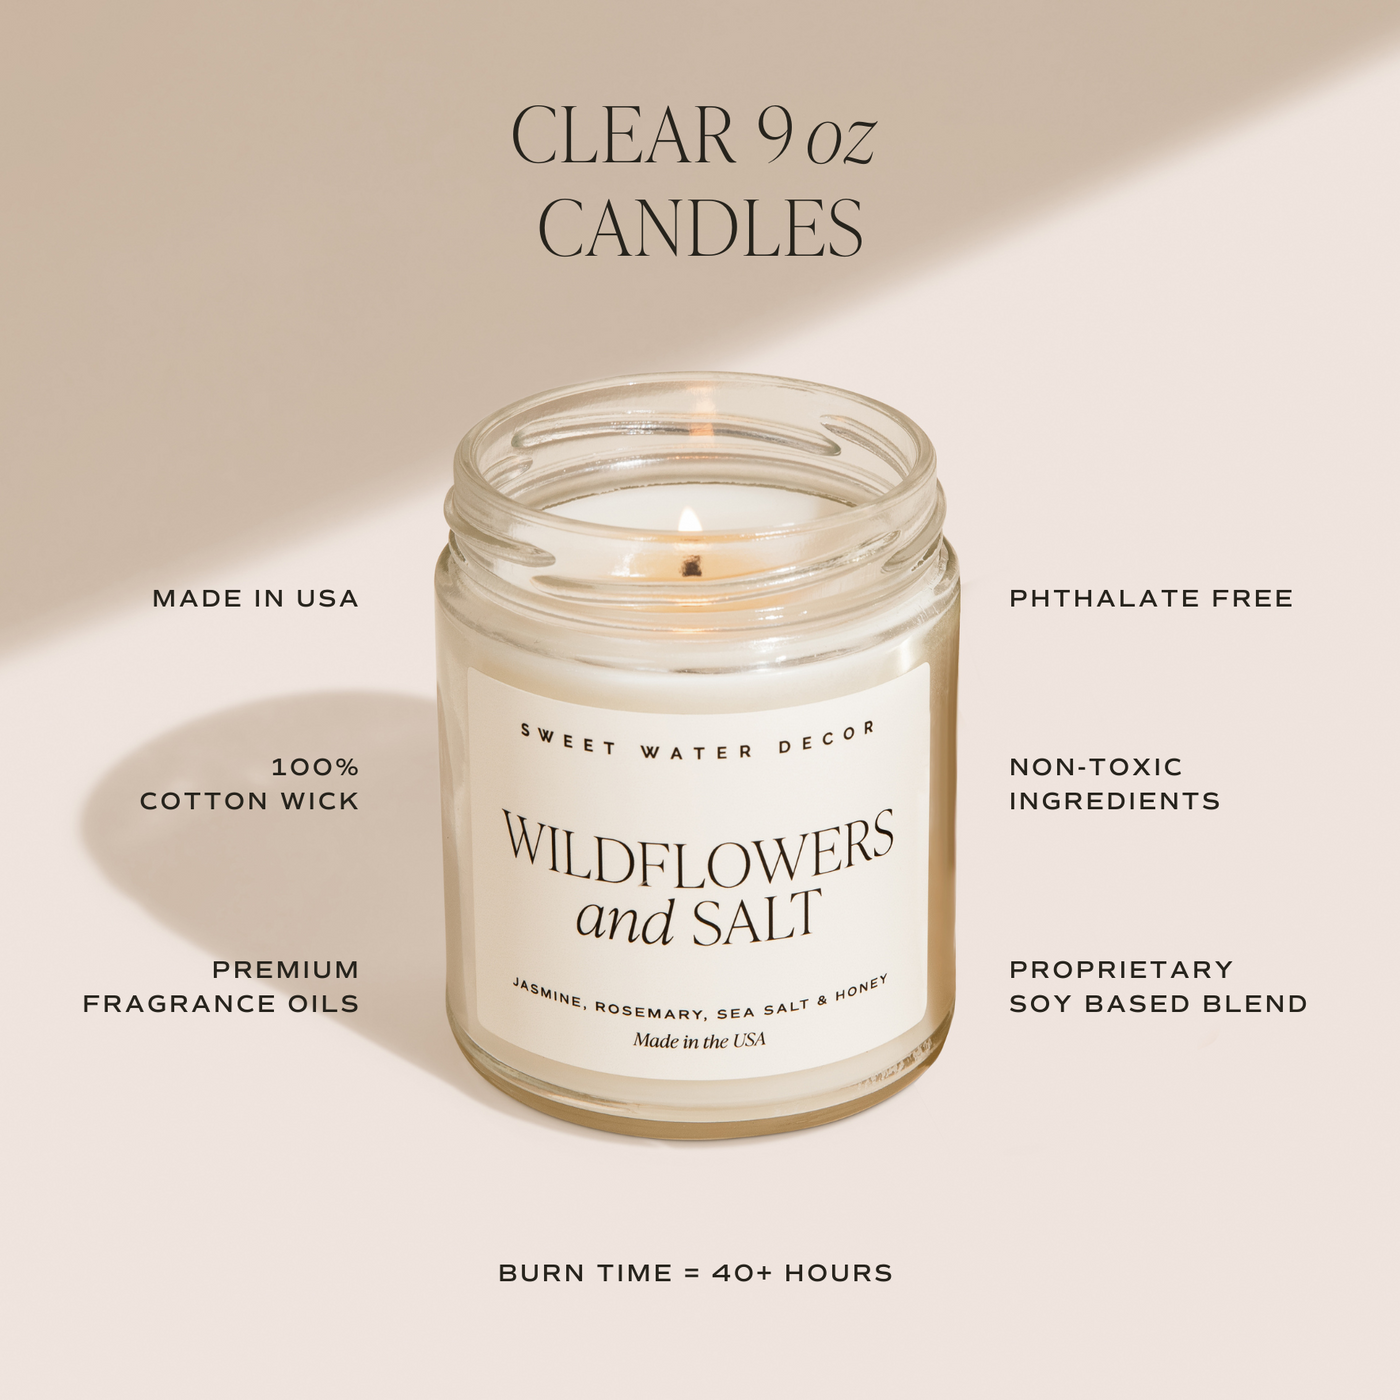 Clean burning candles made in USA premium fragrance oils 100% cotton wick non-toxic ingredients phthalate free